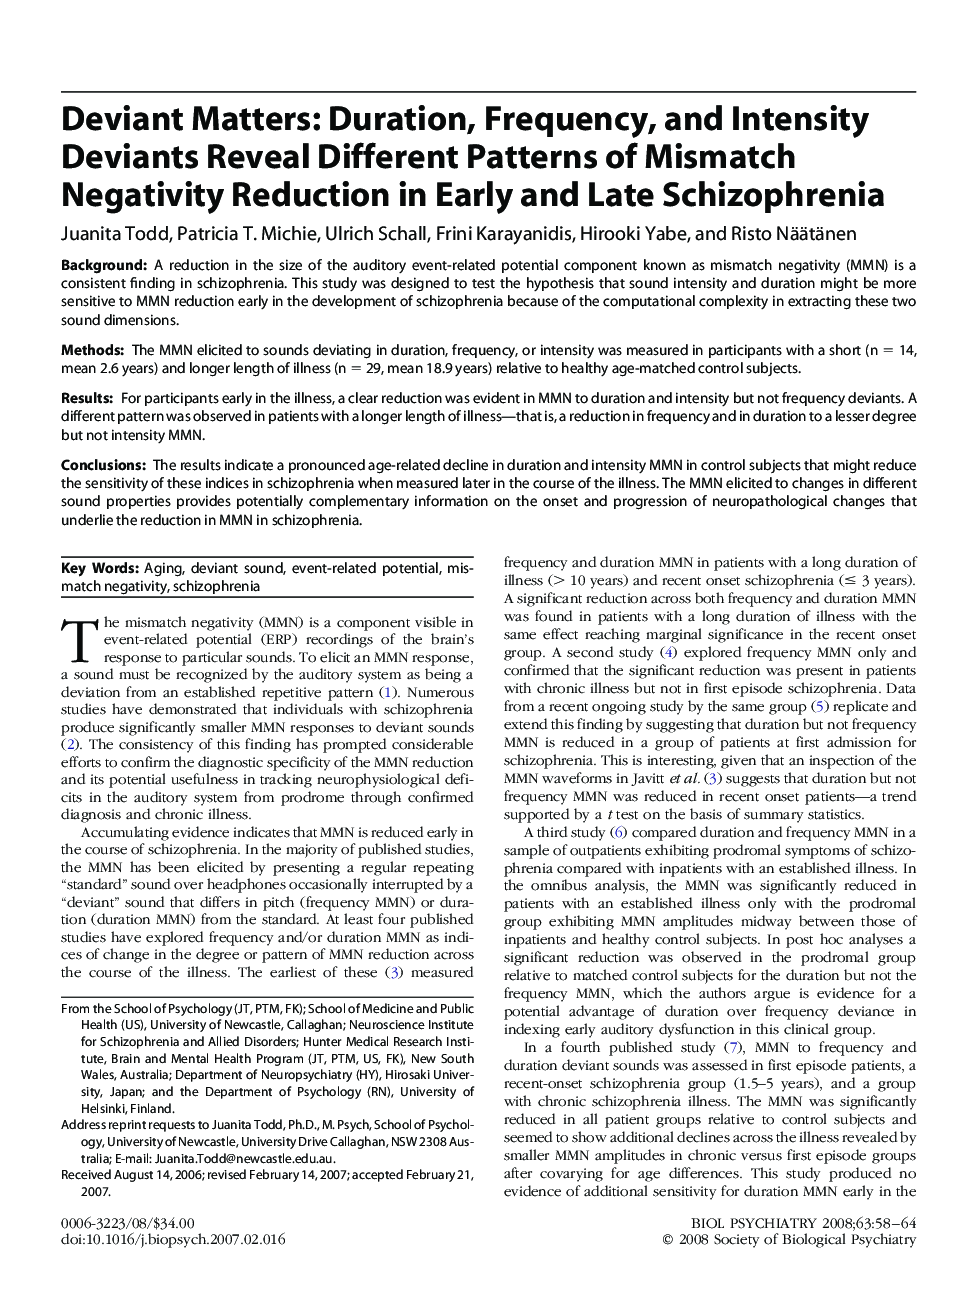 Deviant Matters: Duration, Frequency, and Intensity Deviants Reveal Different Patterns of Mismatch Negativity Reduction in Early and Late Schizophrenia